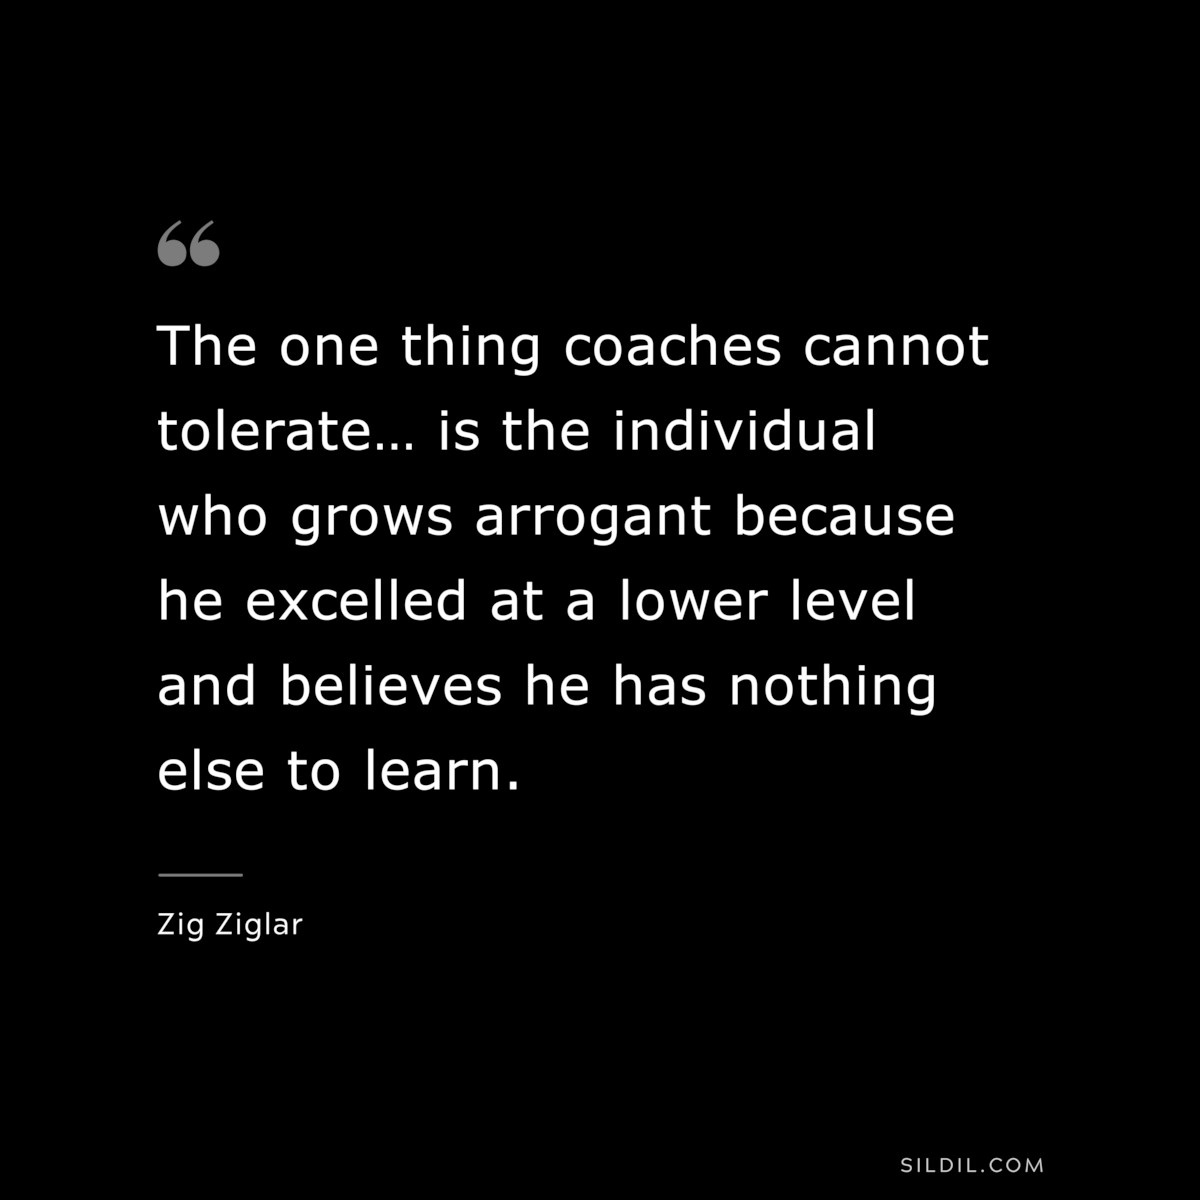 The one thing coaches cannot tolerate… is the individual who grows arrogant because he excelled at a lower level and believes he has nothing else to learn. ― Zig Ziglar